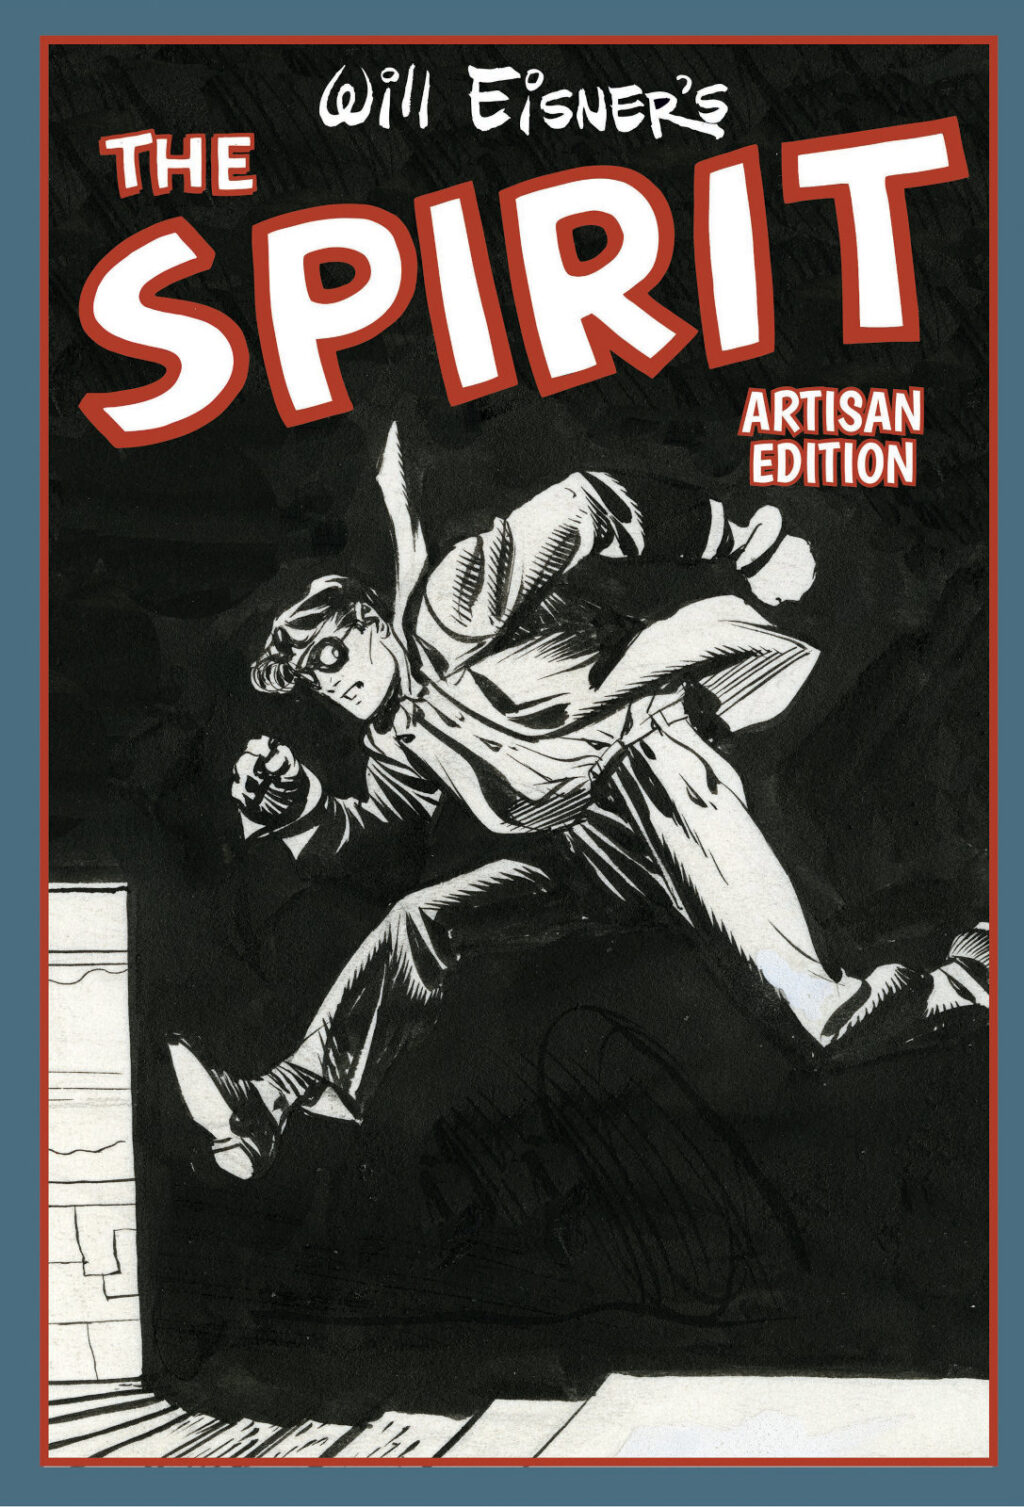 Will Eisners The Best of The Spirit Artisan Edition